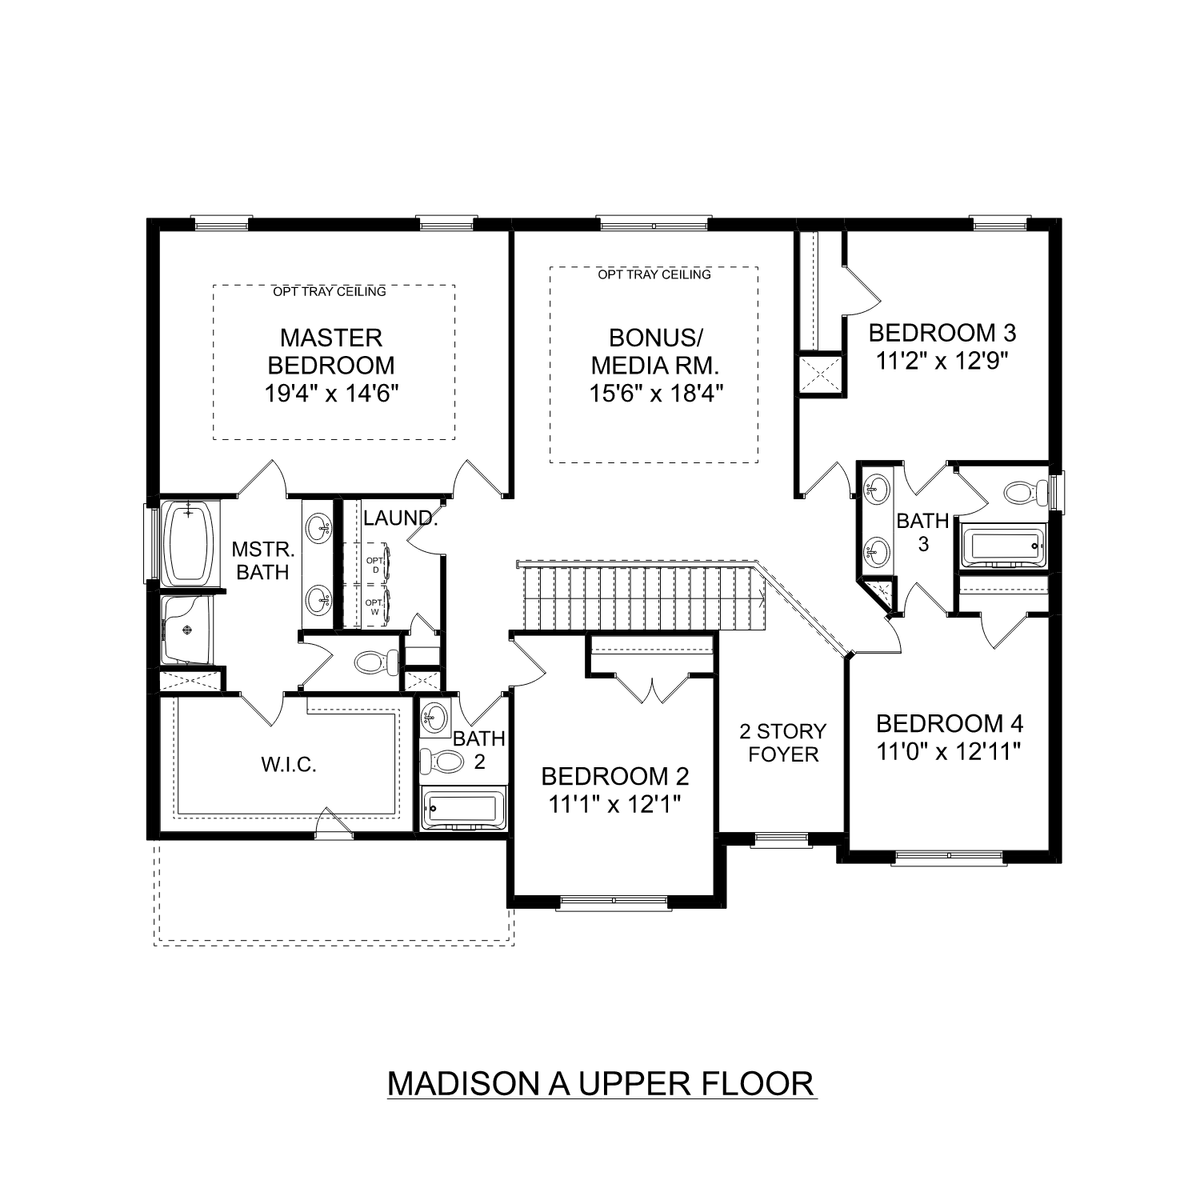 2 - The Madison A floor plan layout for 108 Nellies Way in Davidson Homes' Pikes Ridge community.